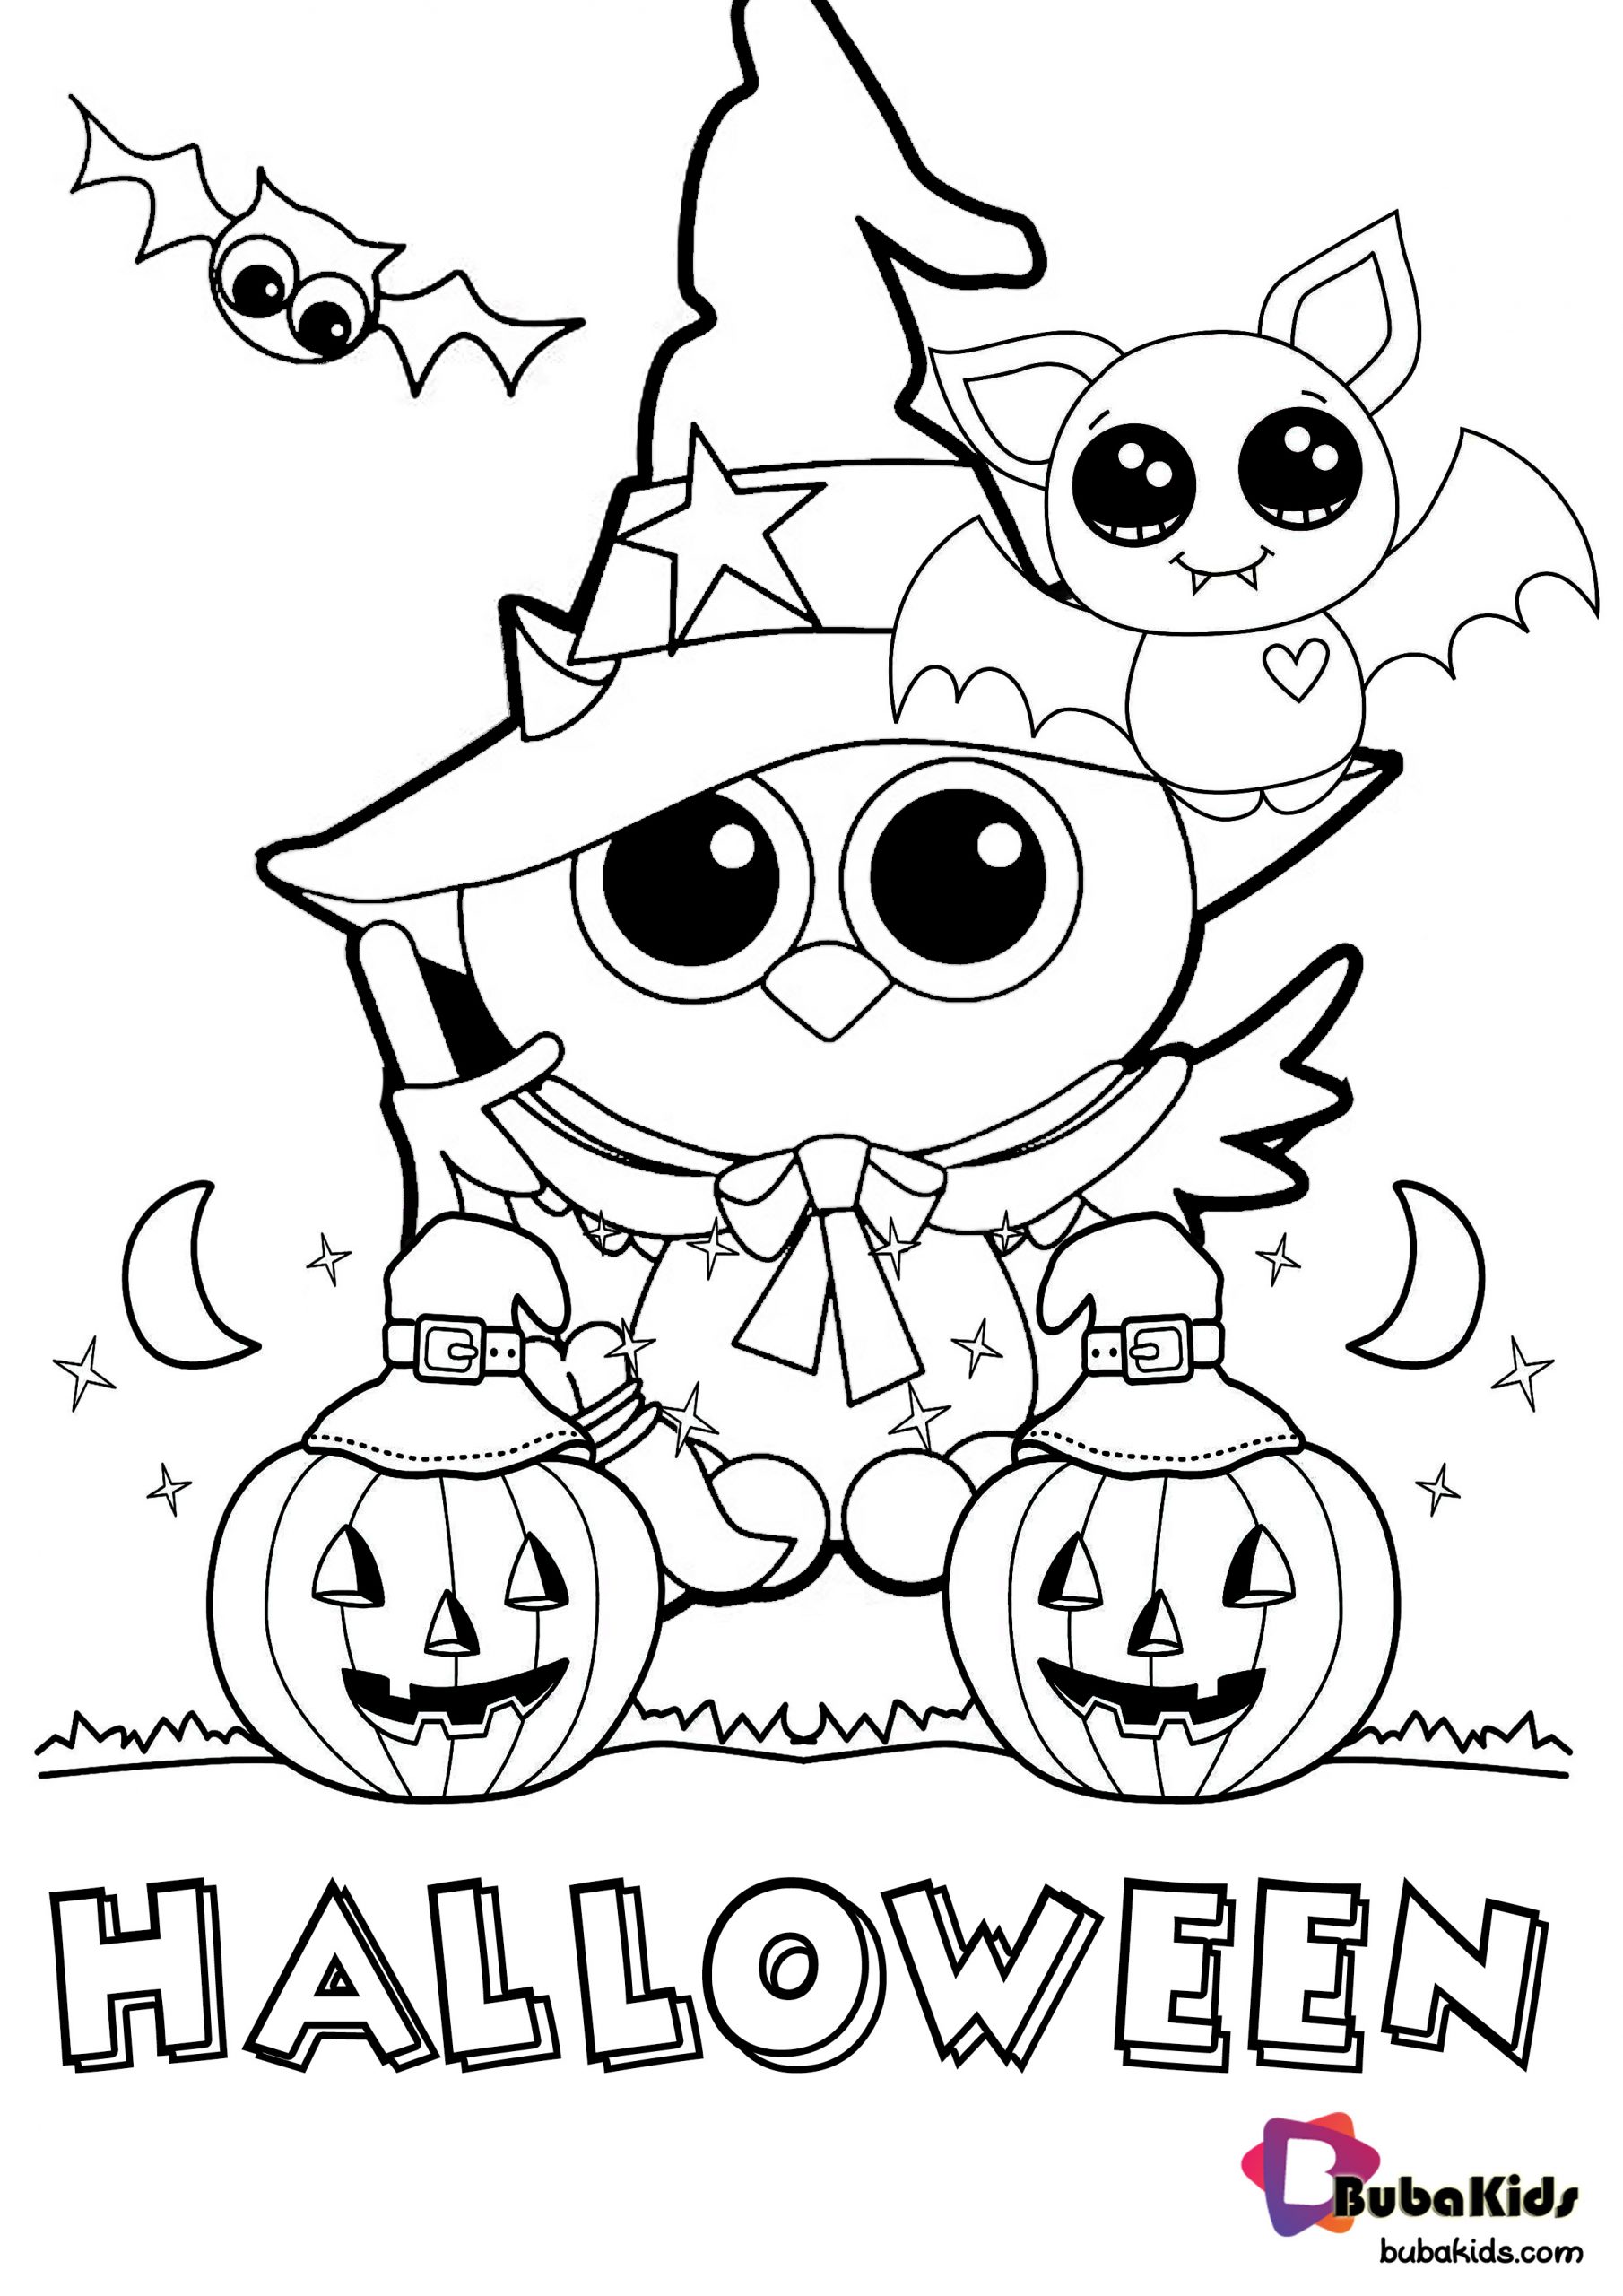 Halloween Coloring Pages Printable Free - Bubakids destiné Images Halloween Imprimer 